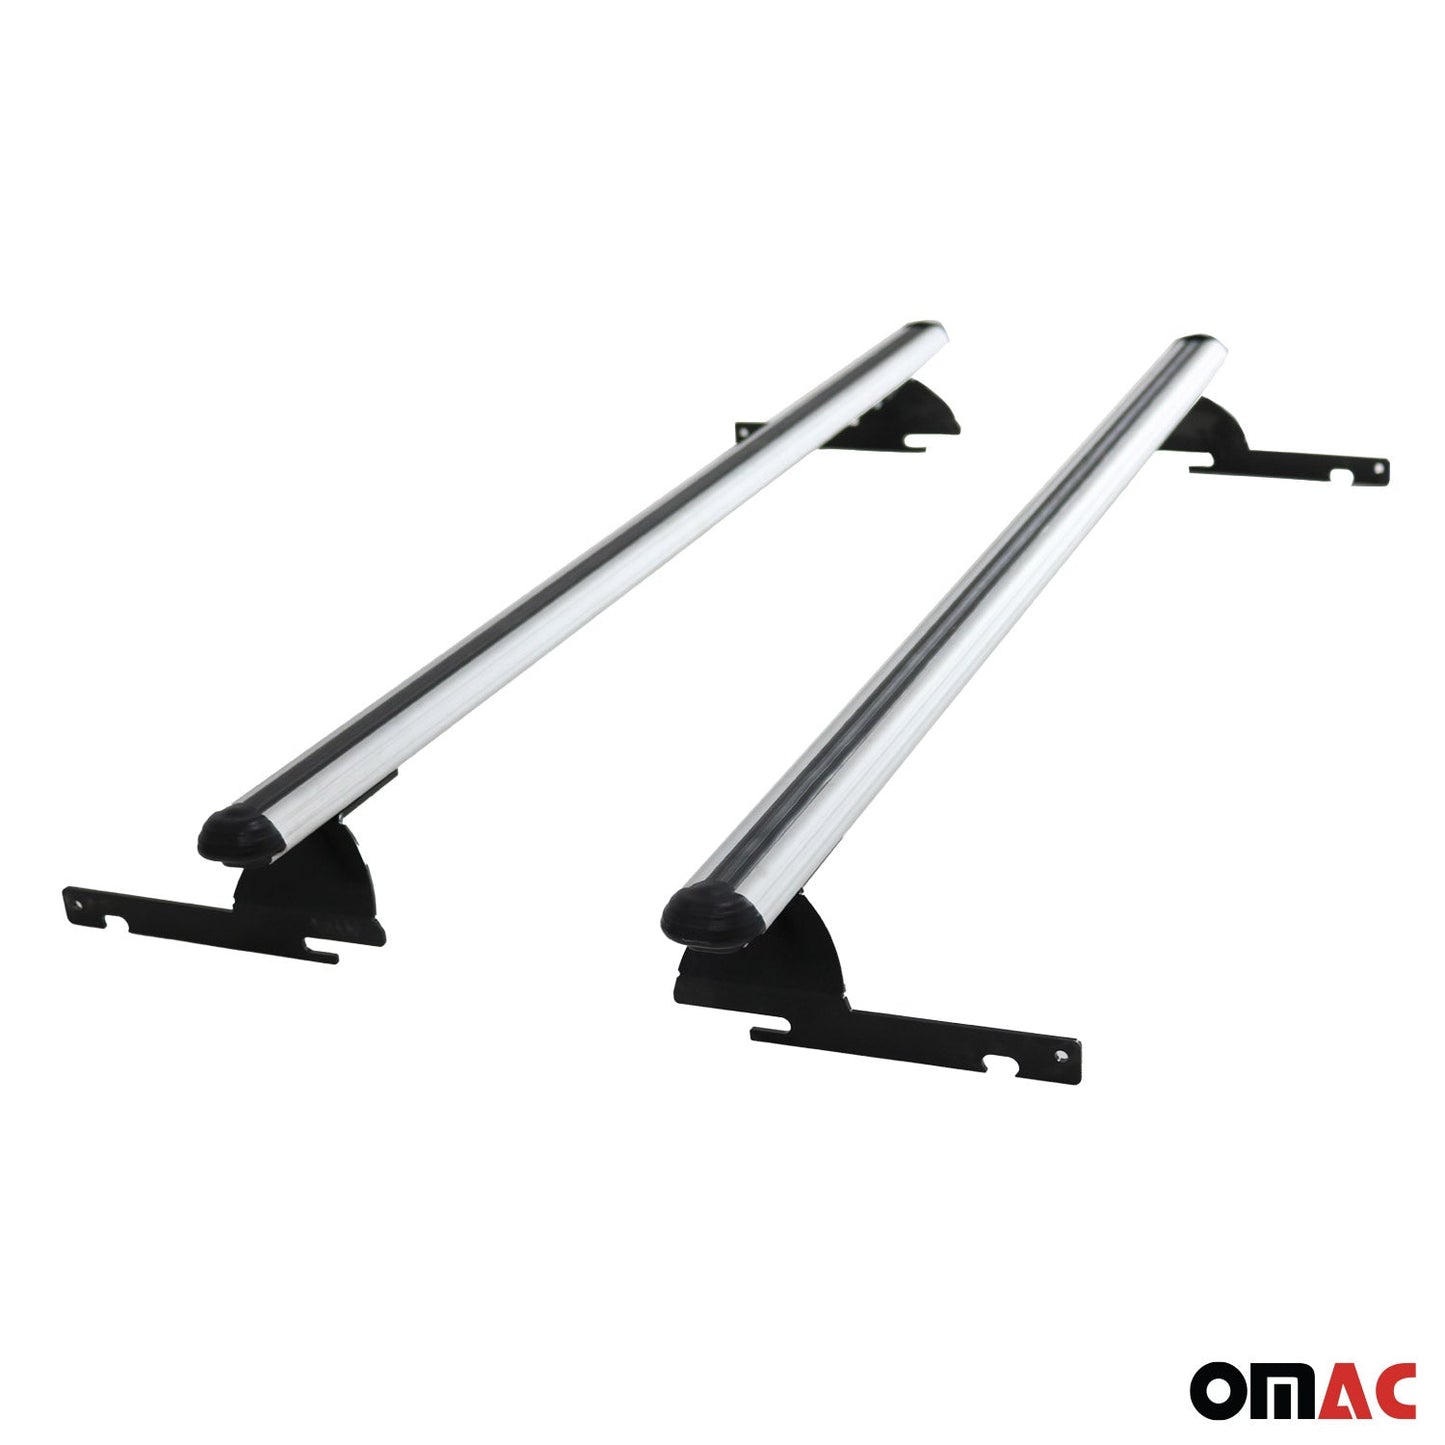 OMAC Trunk Bed Carrier Roof Racks Cross Bars for Ford EcoSport 2013-2017 Gray 2Pcs 2630920